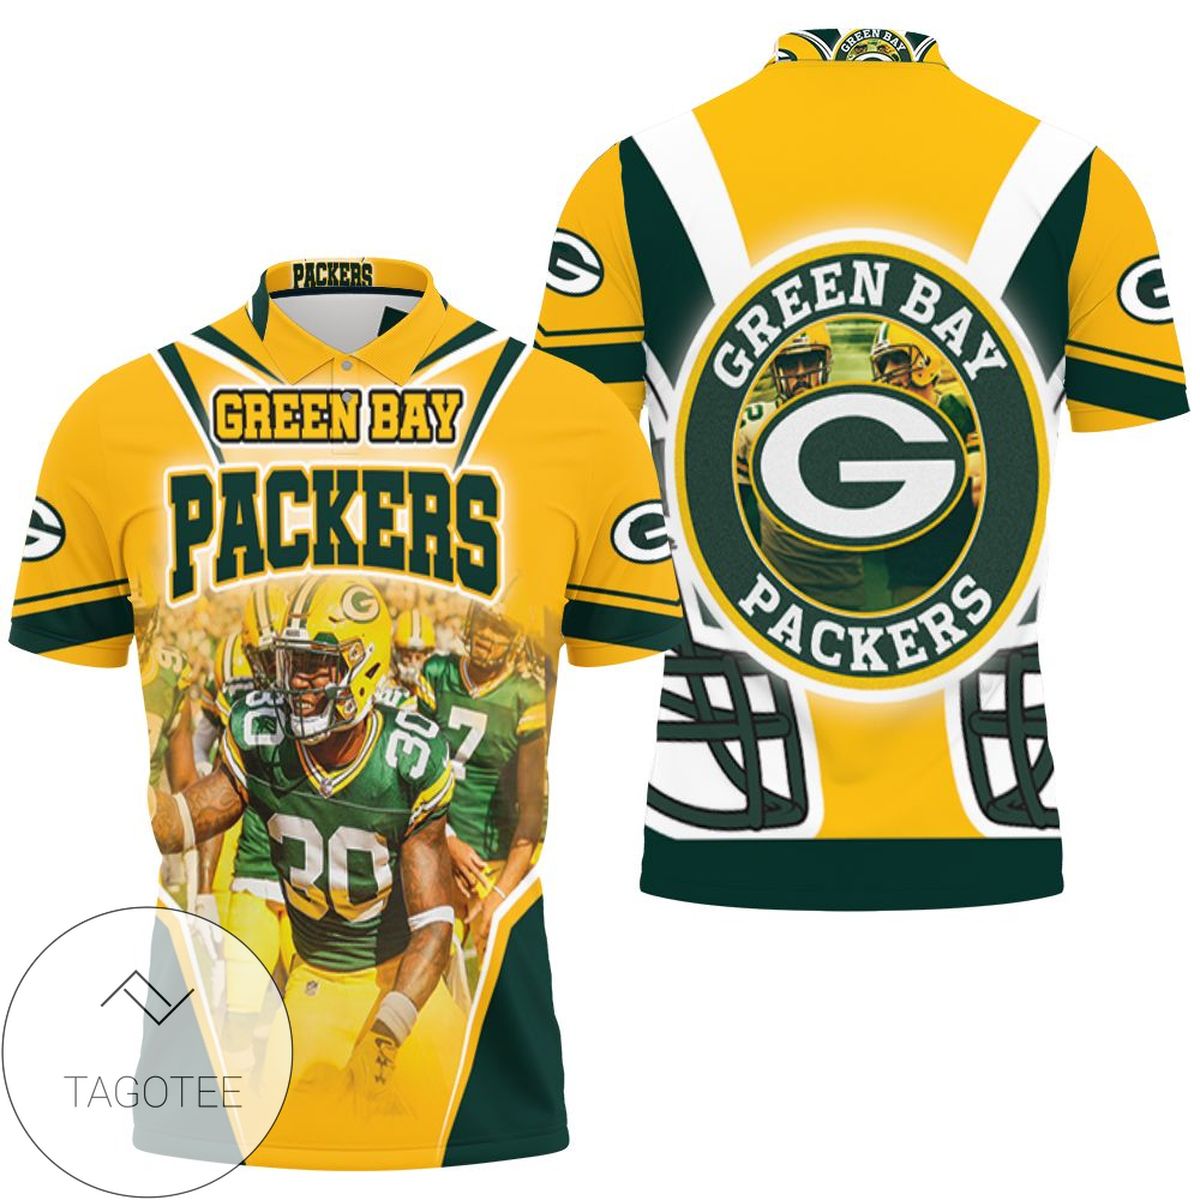 Green Bay Packer Nfc North Champions Division Super Bowl 2021 All Over Print Polo Shirt